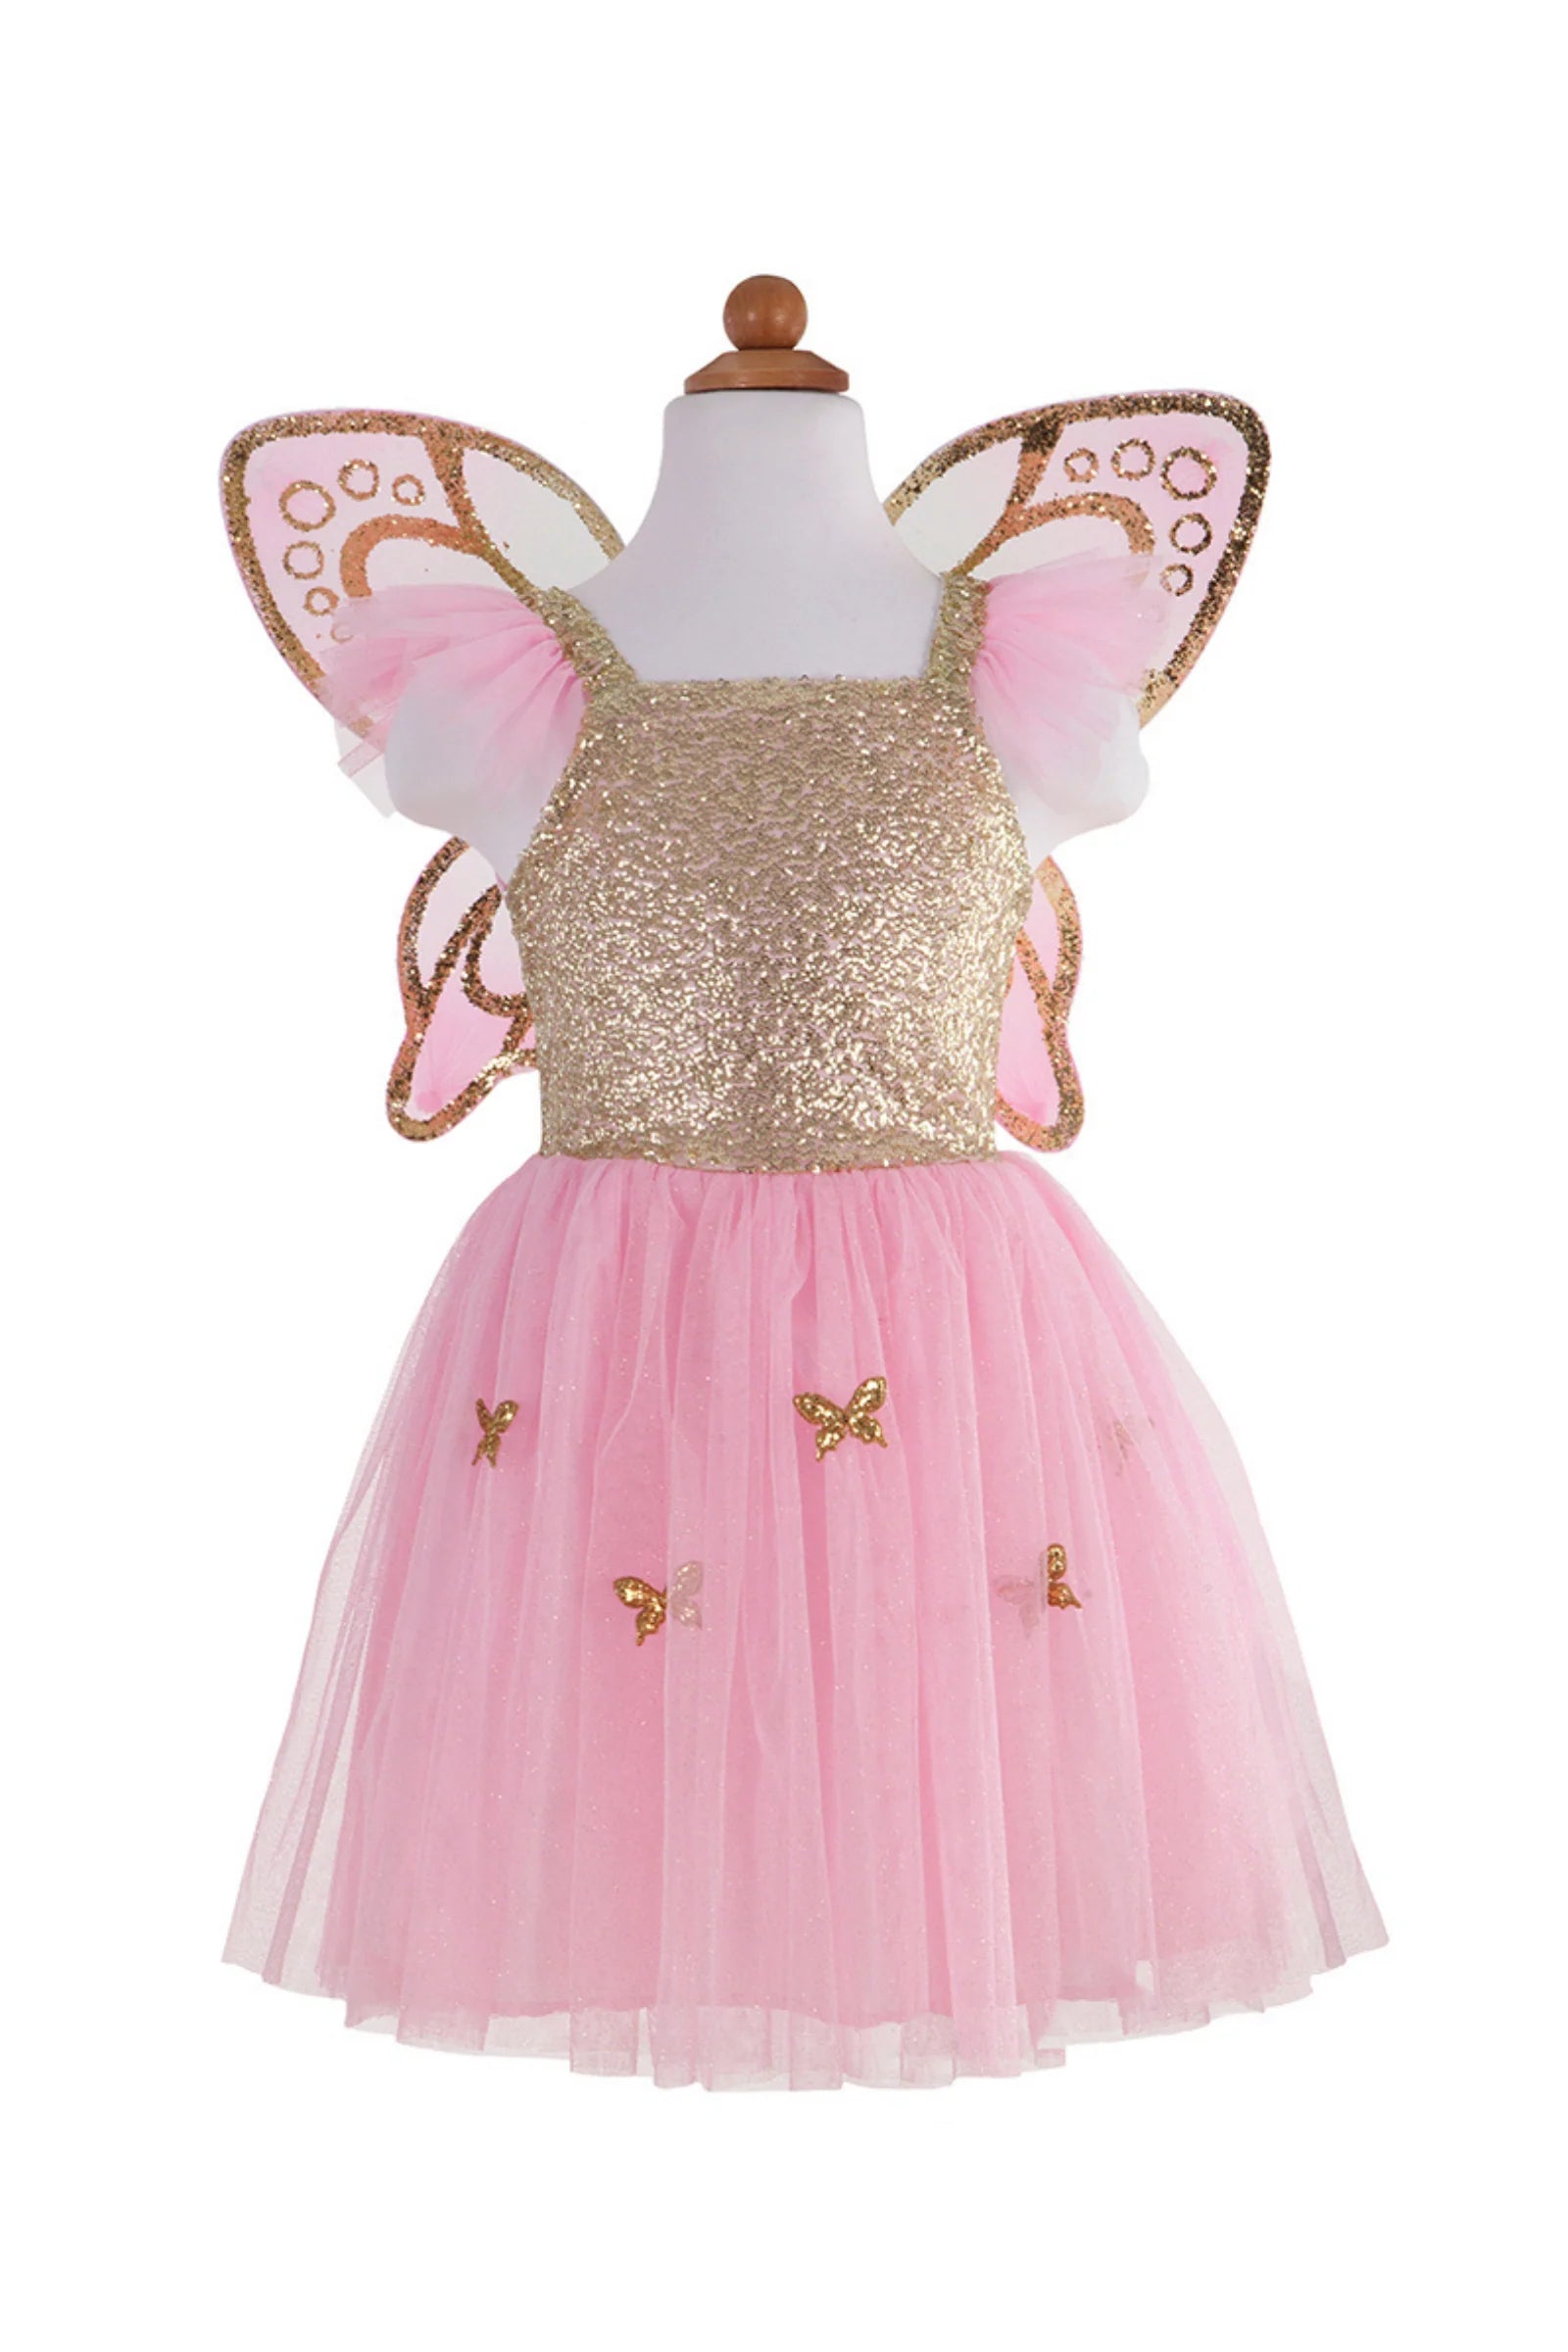 Great Pretenders Gold Butterfly Dress with Wings